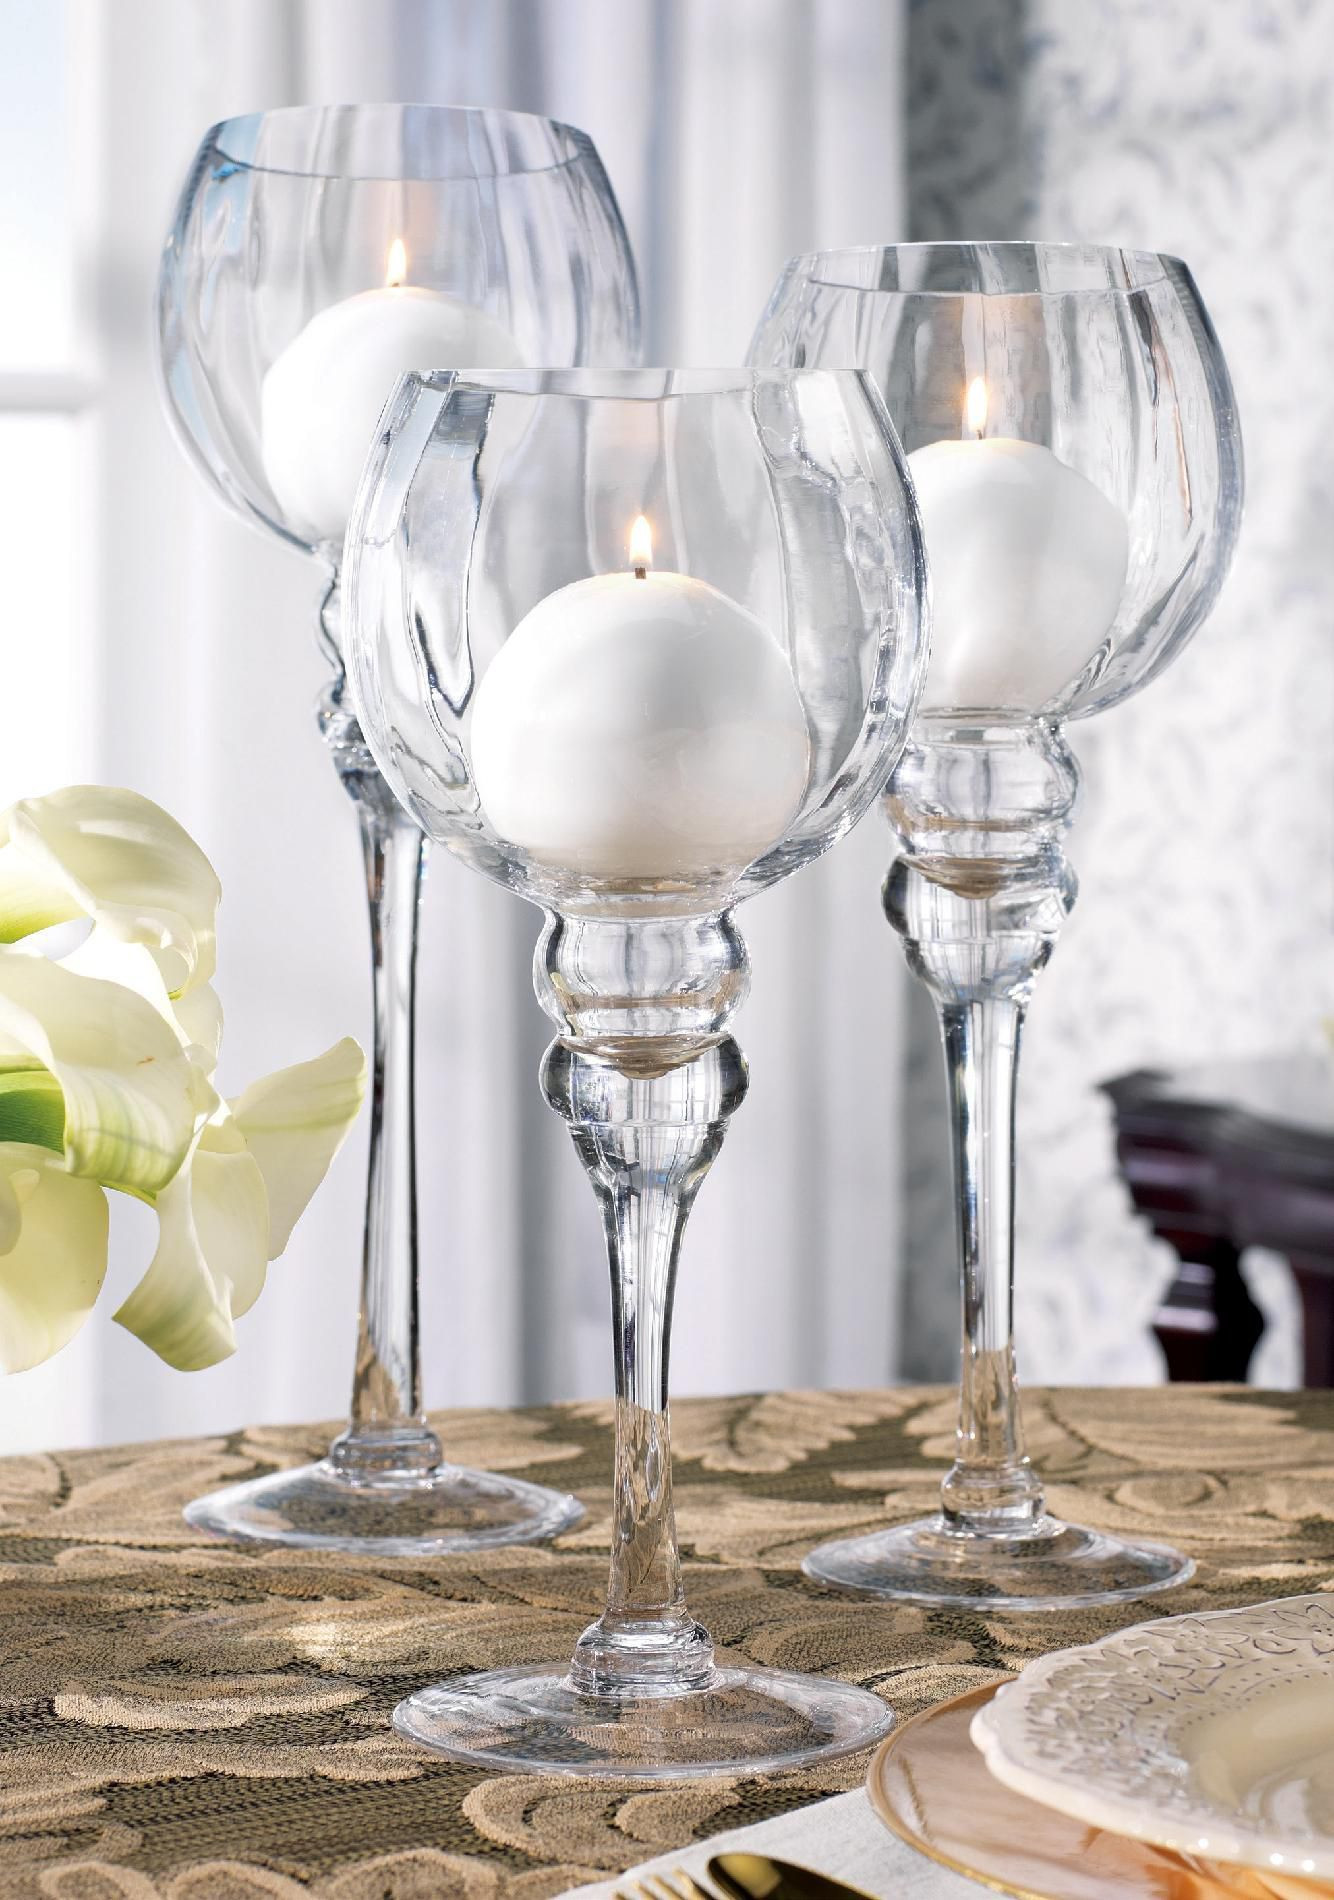 22 Fantastic Footed Glass Hurricane Vase 2024 free download footed glass hurricane vase of normandy crackled glass candle holders monstermarketplace com with regard to normandy crackled glass candle holders monstermarketplace com shower ideas pintere